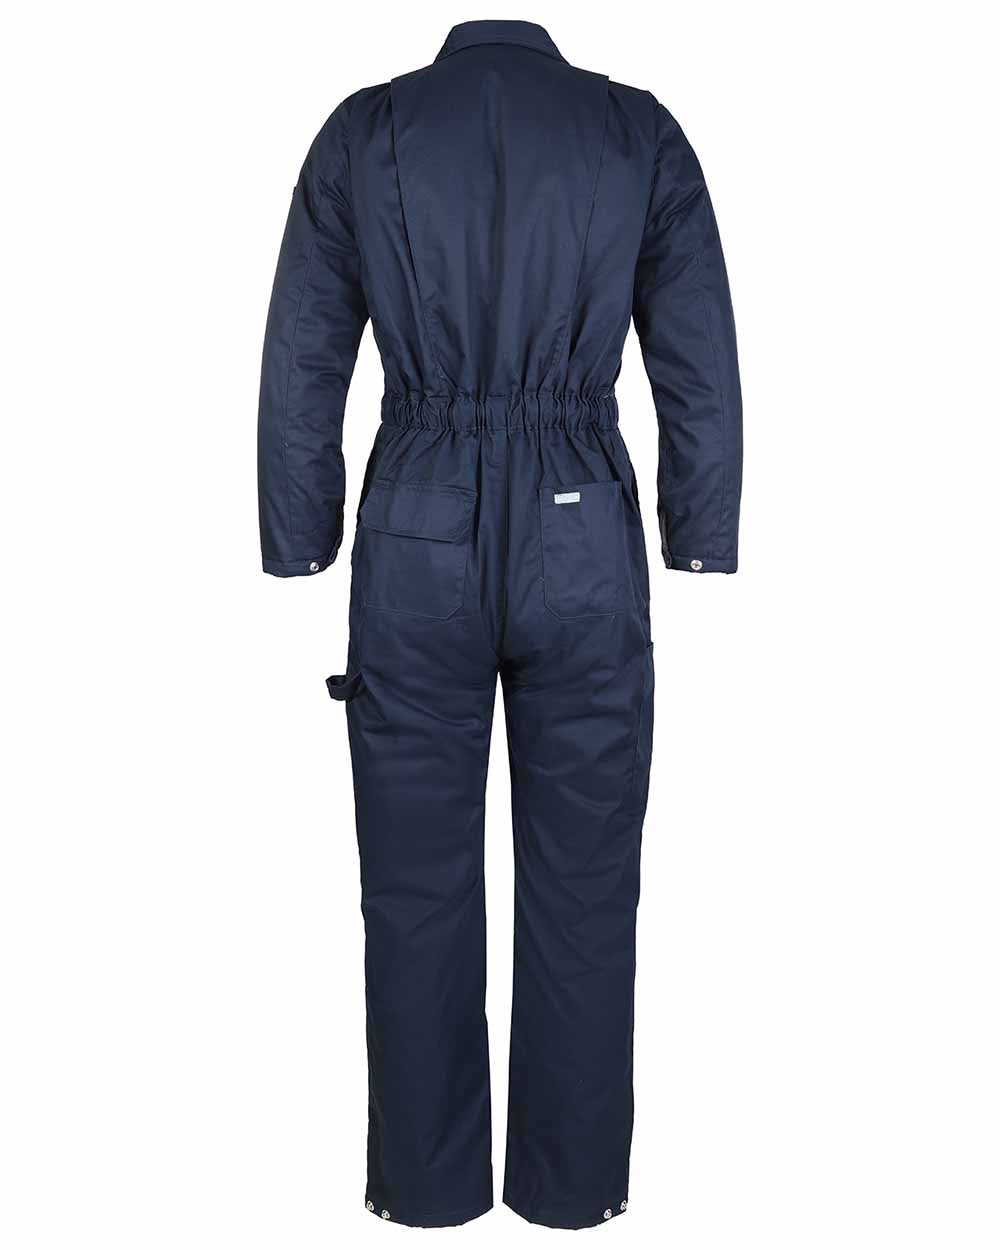 Women's Coverall Jumpsuit Navy with Zipper 6-Pocket (Small